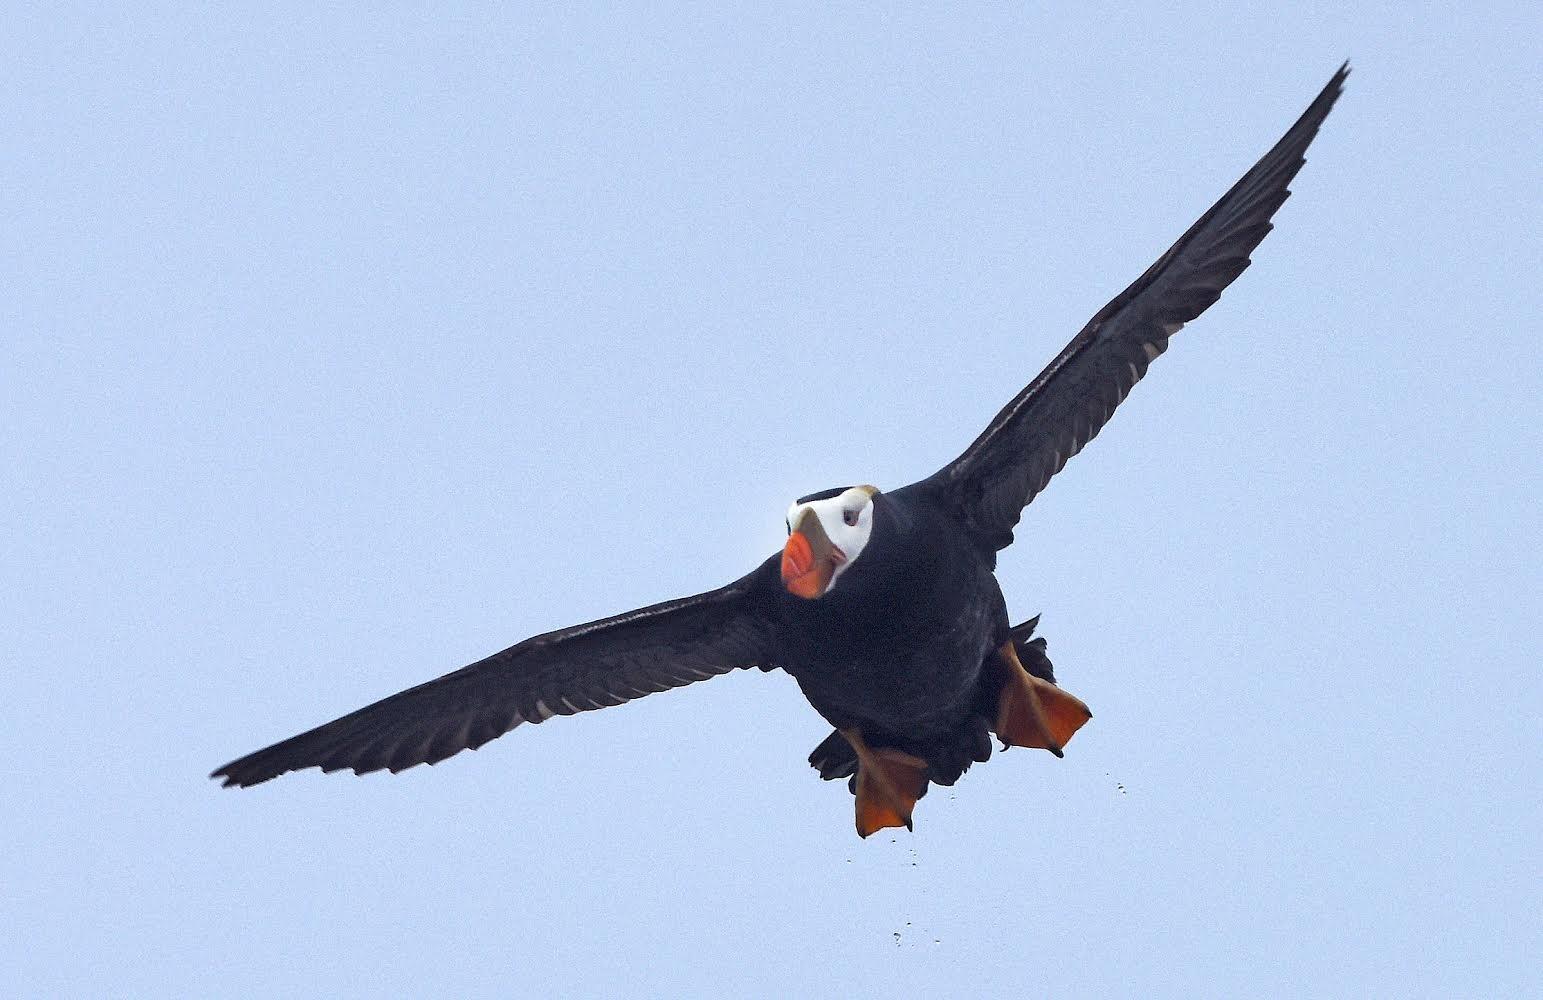 The Tufted Puffin returns, with a fly-over